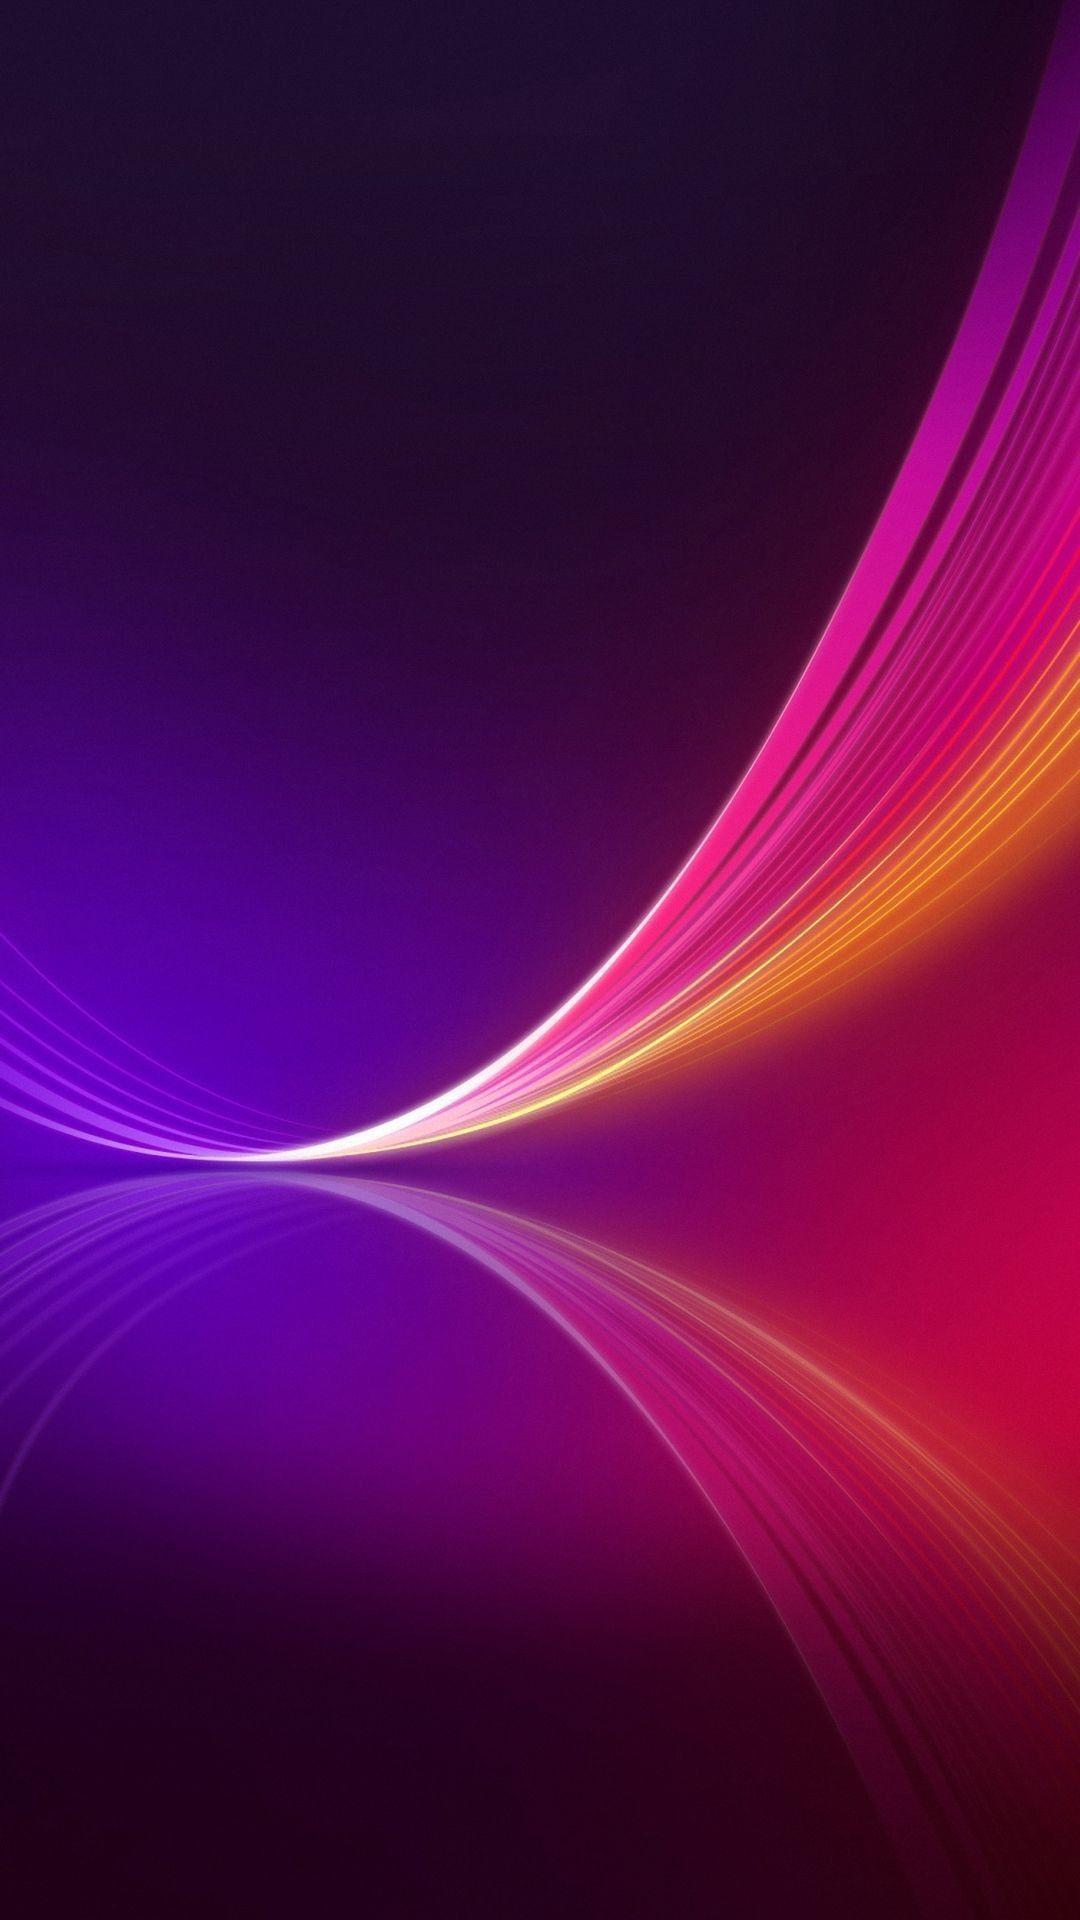 Download the LG V30s official wallpapers for your phone right now Gallery